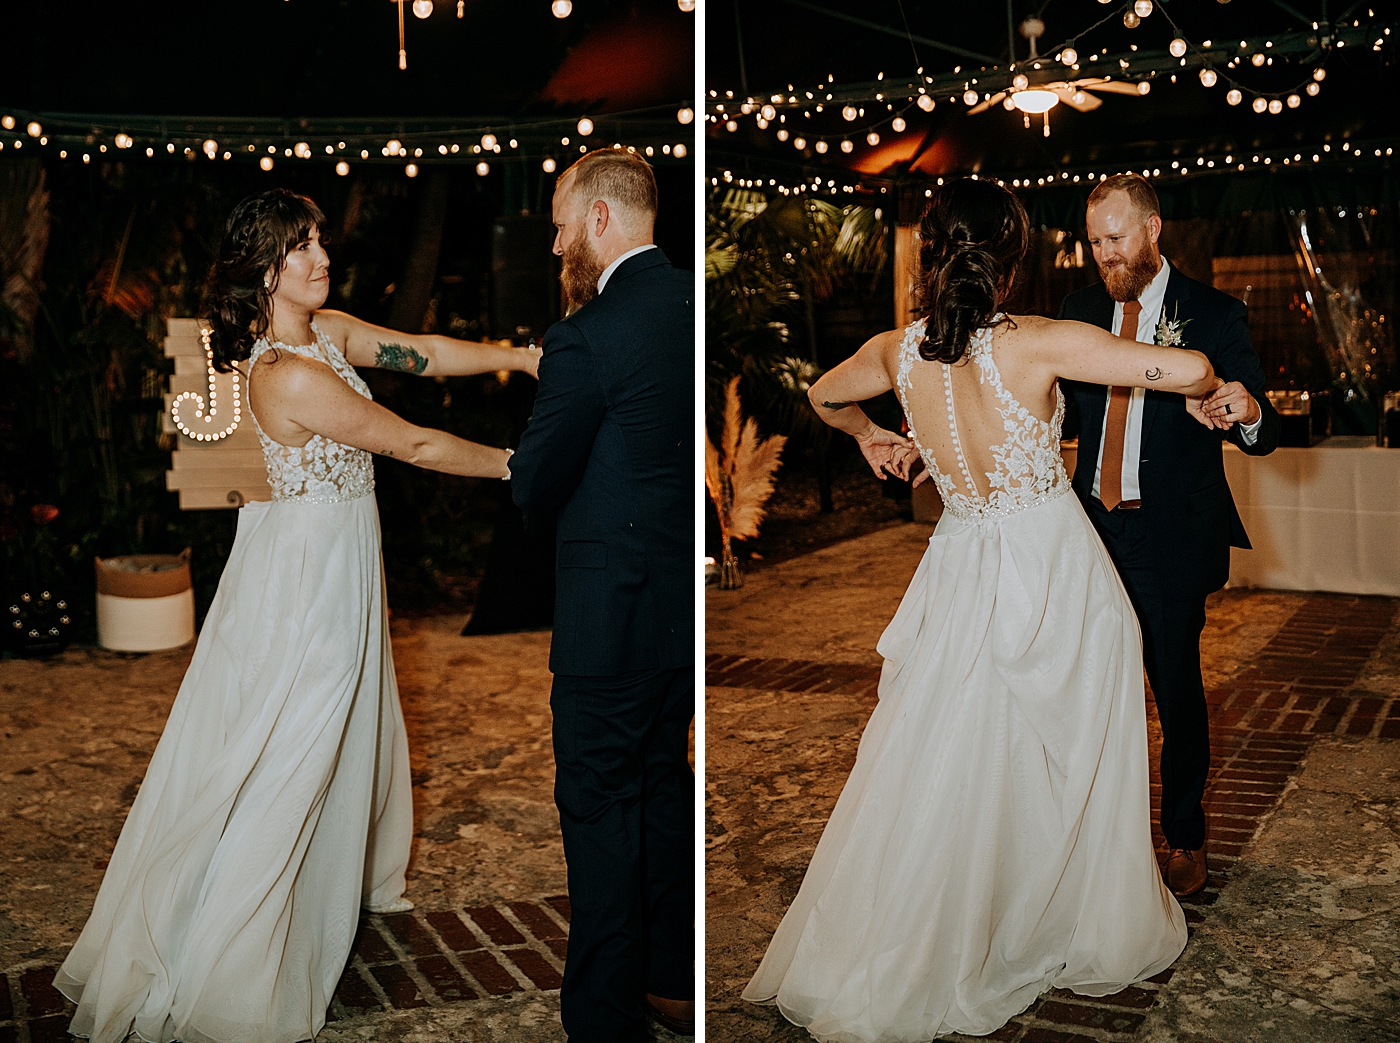 Bride and Groom having fun first dance Historic Stranahan House Wedding Photography captured by South Florida Wedding Photographer Maggie Alvarez Photography